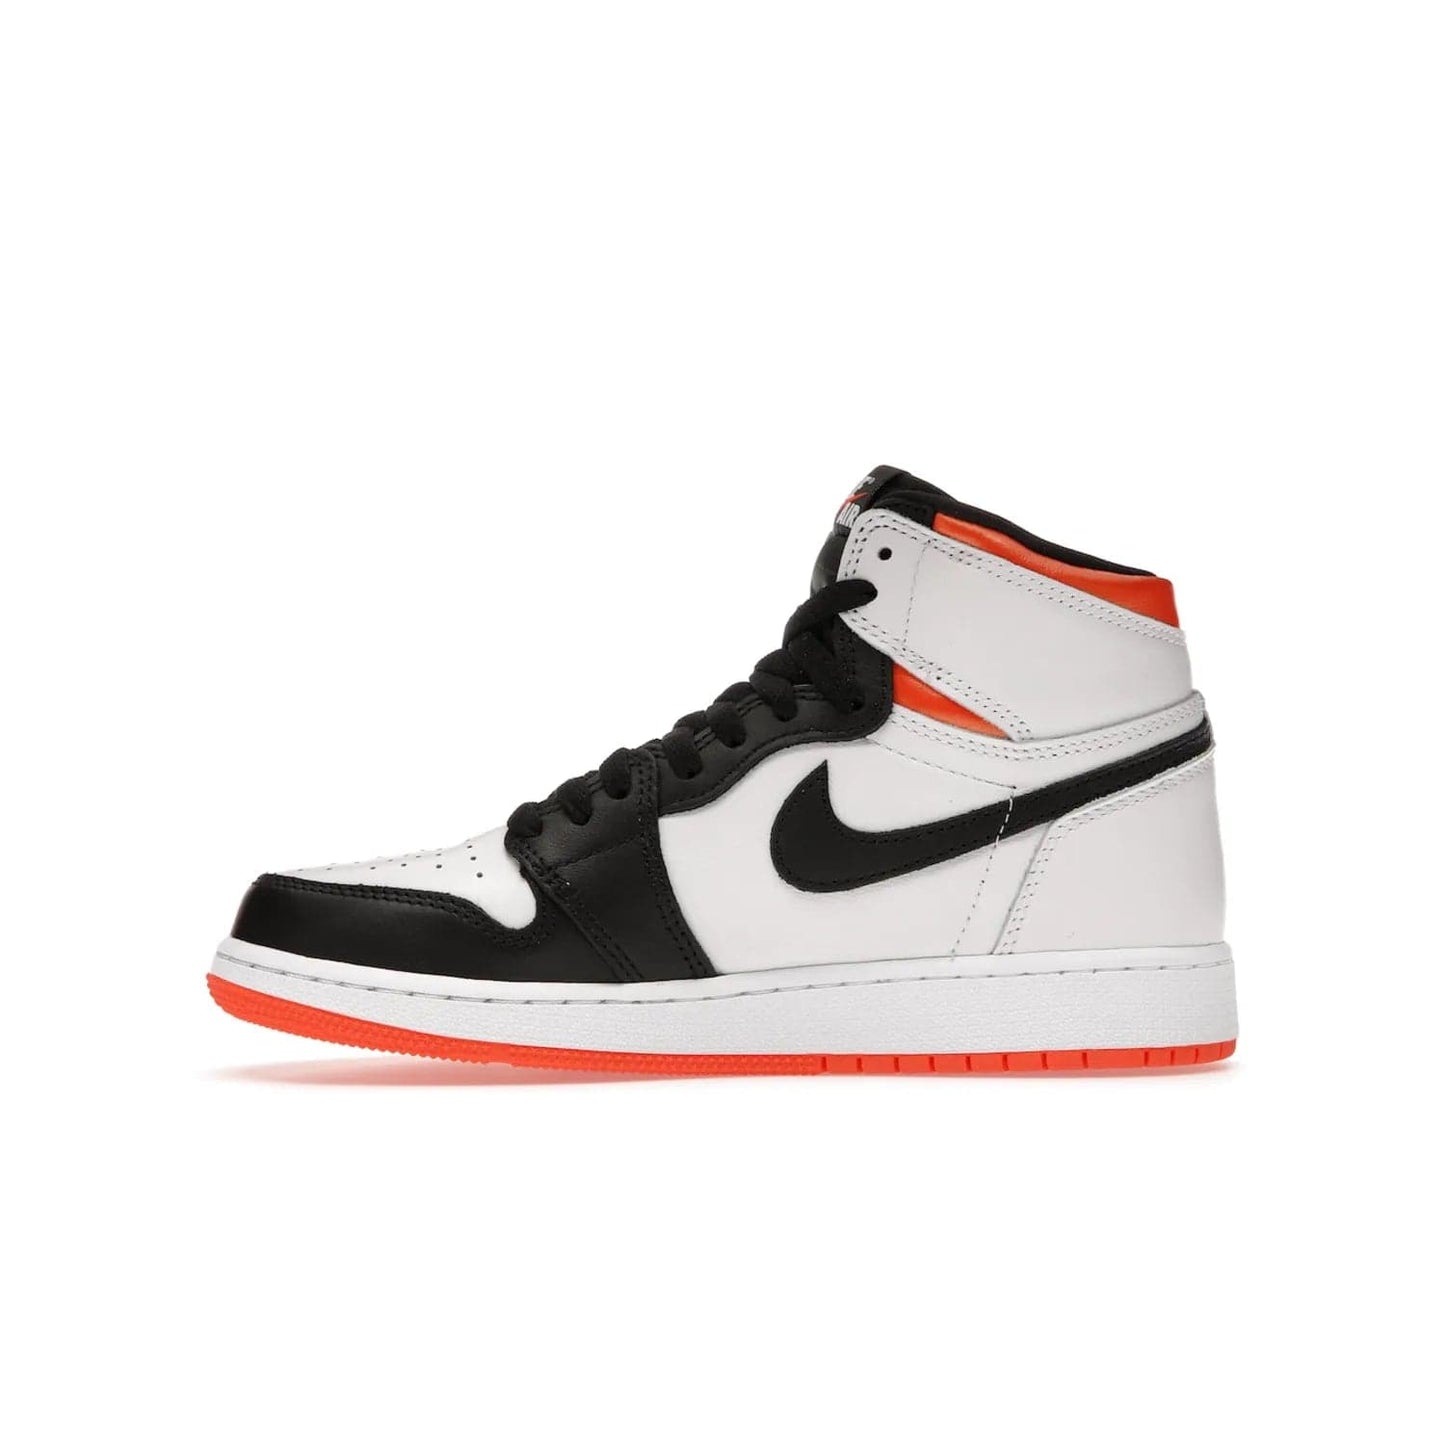 Jordan 1 High OG Electro Orange (GS) - Image 19 - Only at www.BallersClubKickz.com - The Air Jordan 1 High OG Electro Orange GS is the ideal shoe for kids on the go. Featuring white leather uppers, black overlays, and bright orange accents, it's sure to become a favorite. A great mix of classic style and vibrant colors, the shoe delivers air cushioning for comfort and hard orange rubber for grip. Release on July 17th, 2021. Get them a pair today.